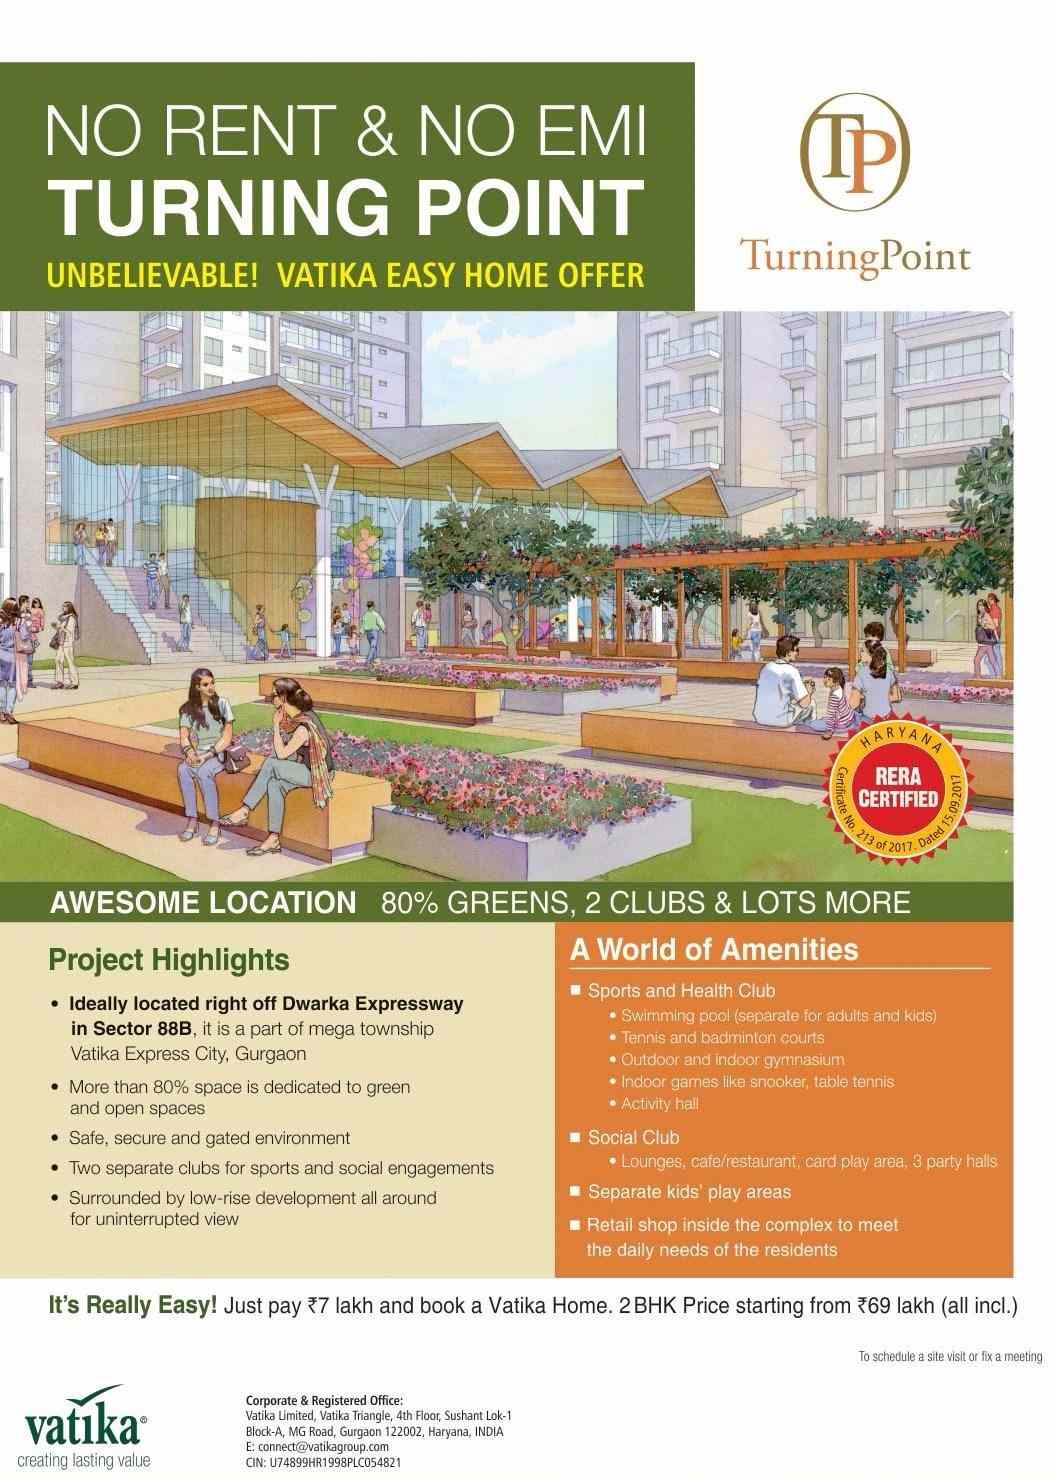 Avail easy home offer that includes no rent & no EMI at Vatika Turning Point in Gurgaon